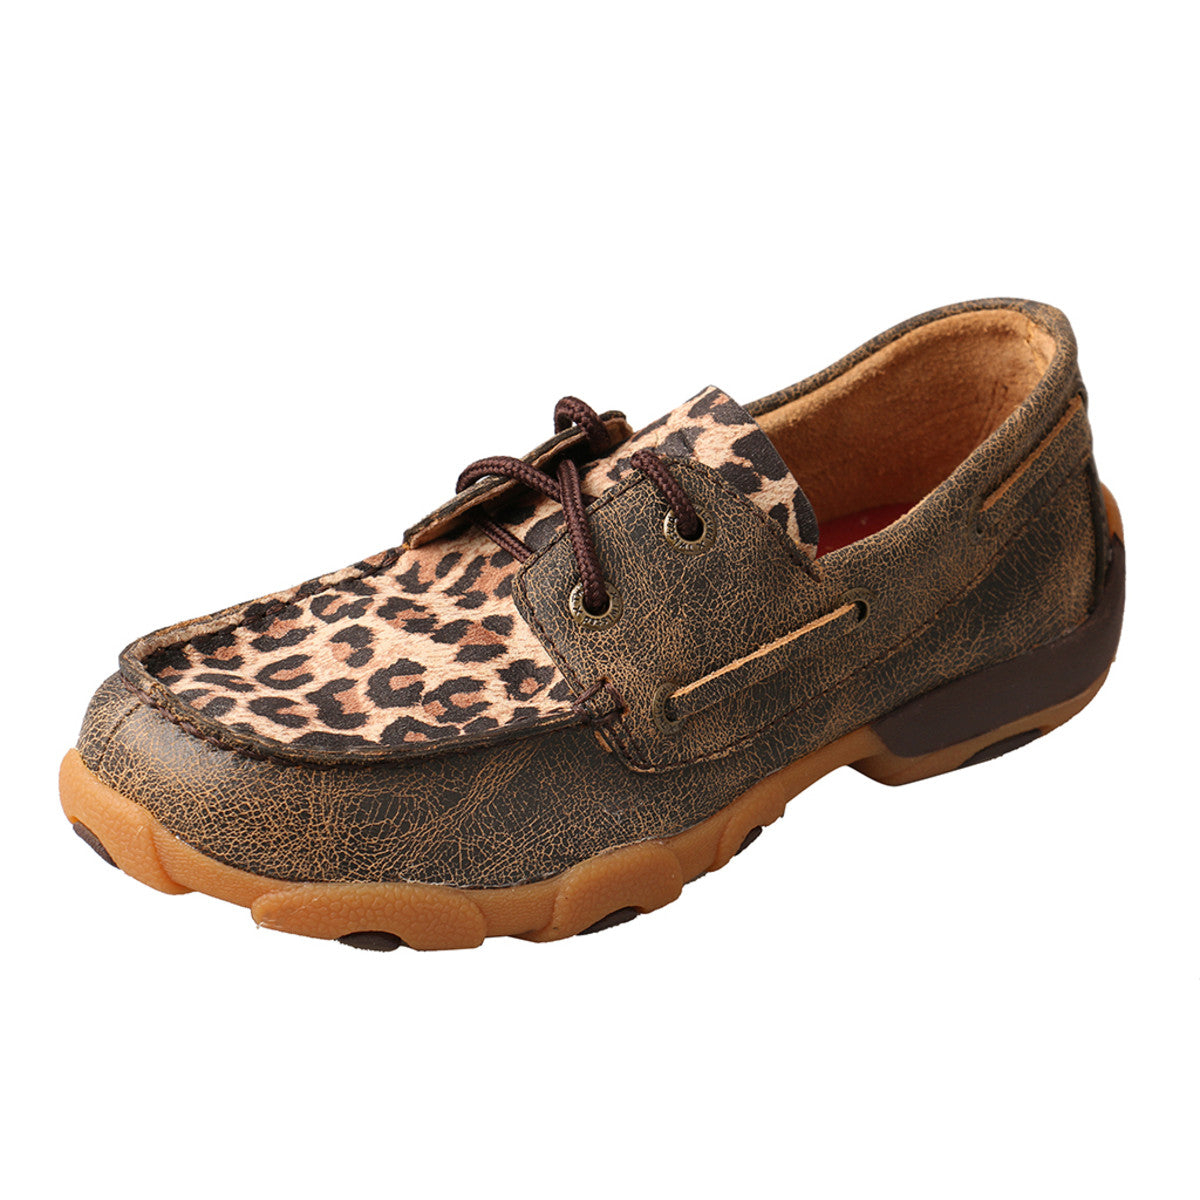 Kids' Twisted X Boat Shoe Driving Moccasins in Distressed & Leopard from the side view